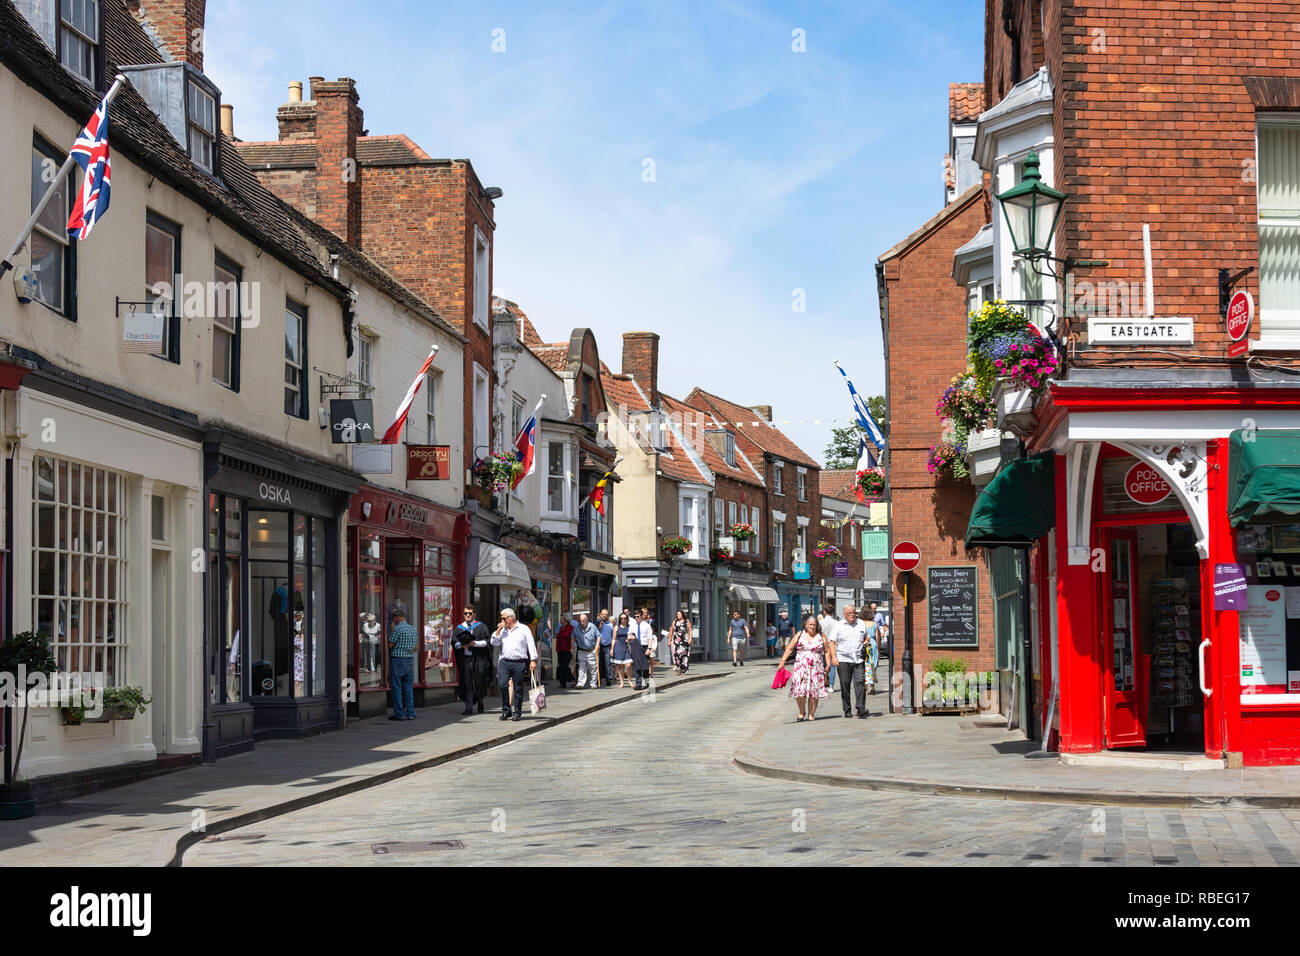 Bailgate, Lincoln, Lincolnshire, Angleterre, Royaume-Uni Banque D'Images